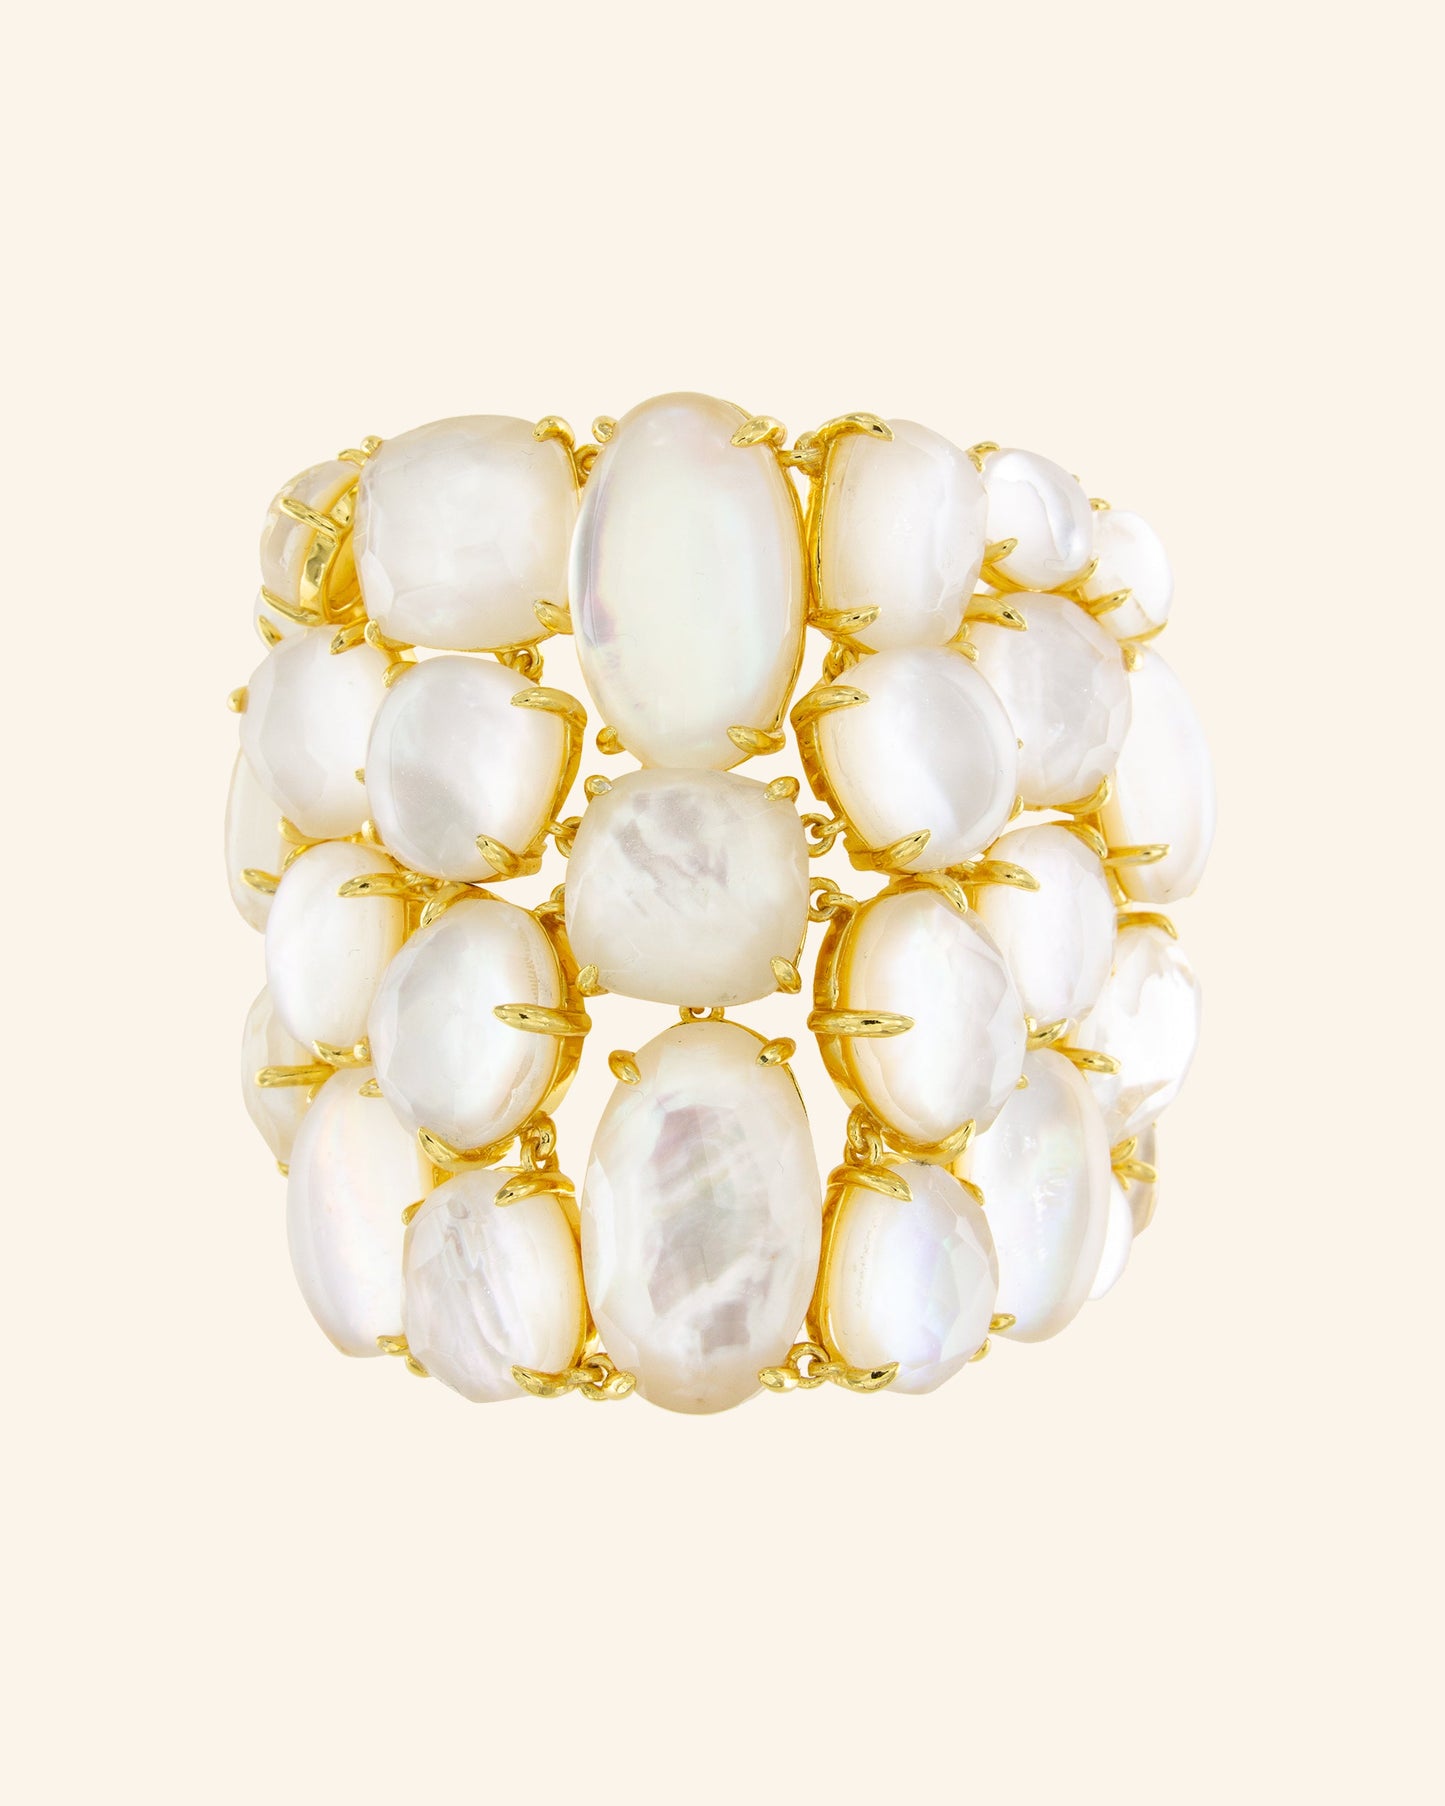 Liberis bracelet with white mother-of-pearl